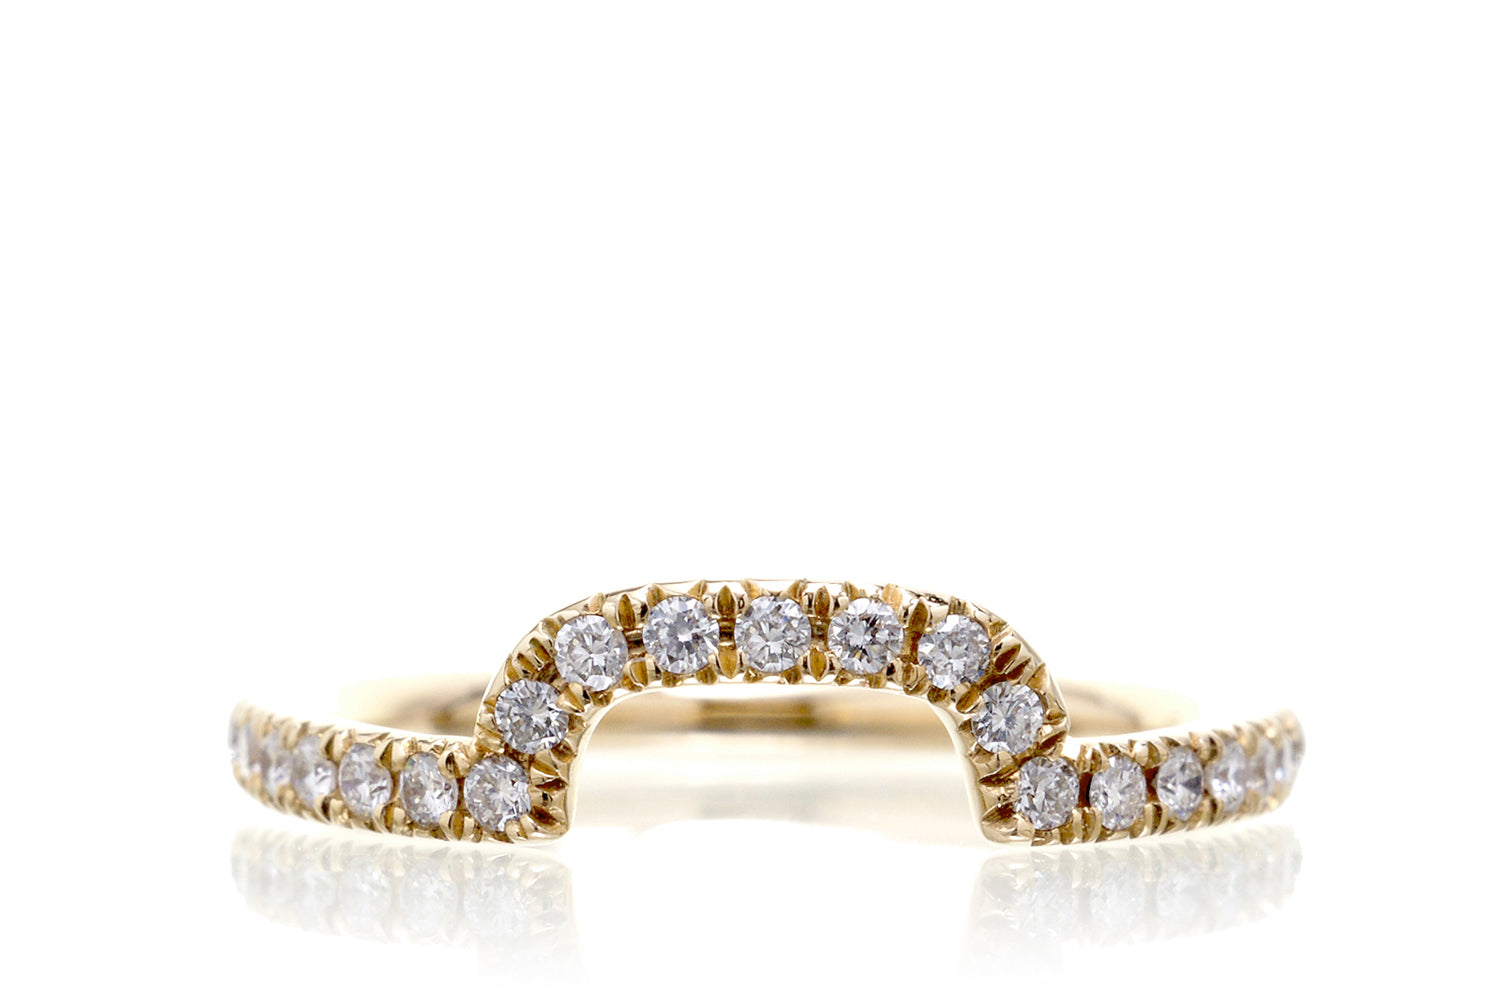 The Drenched Curved Diamond Band